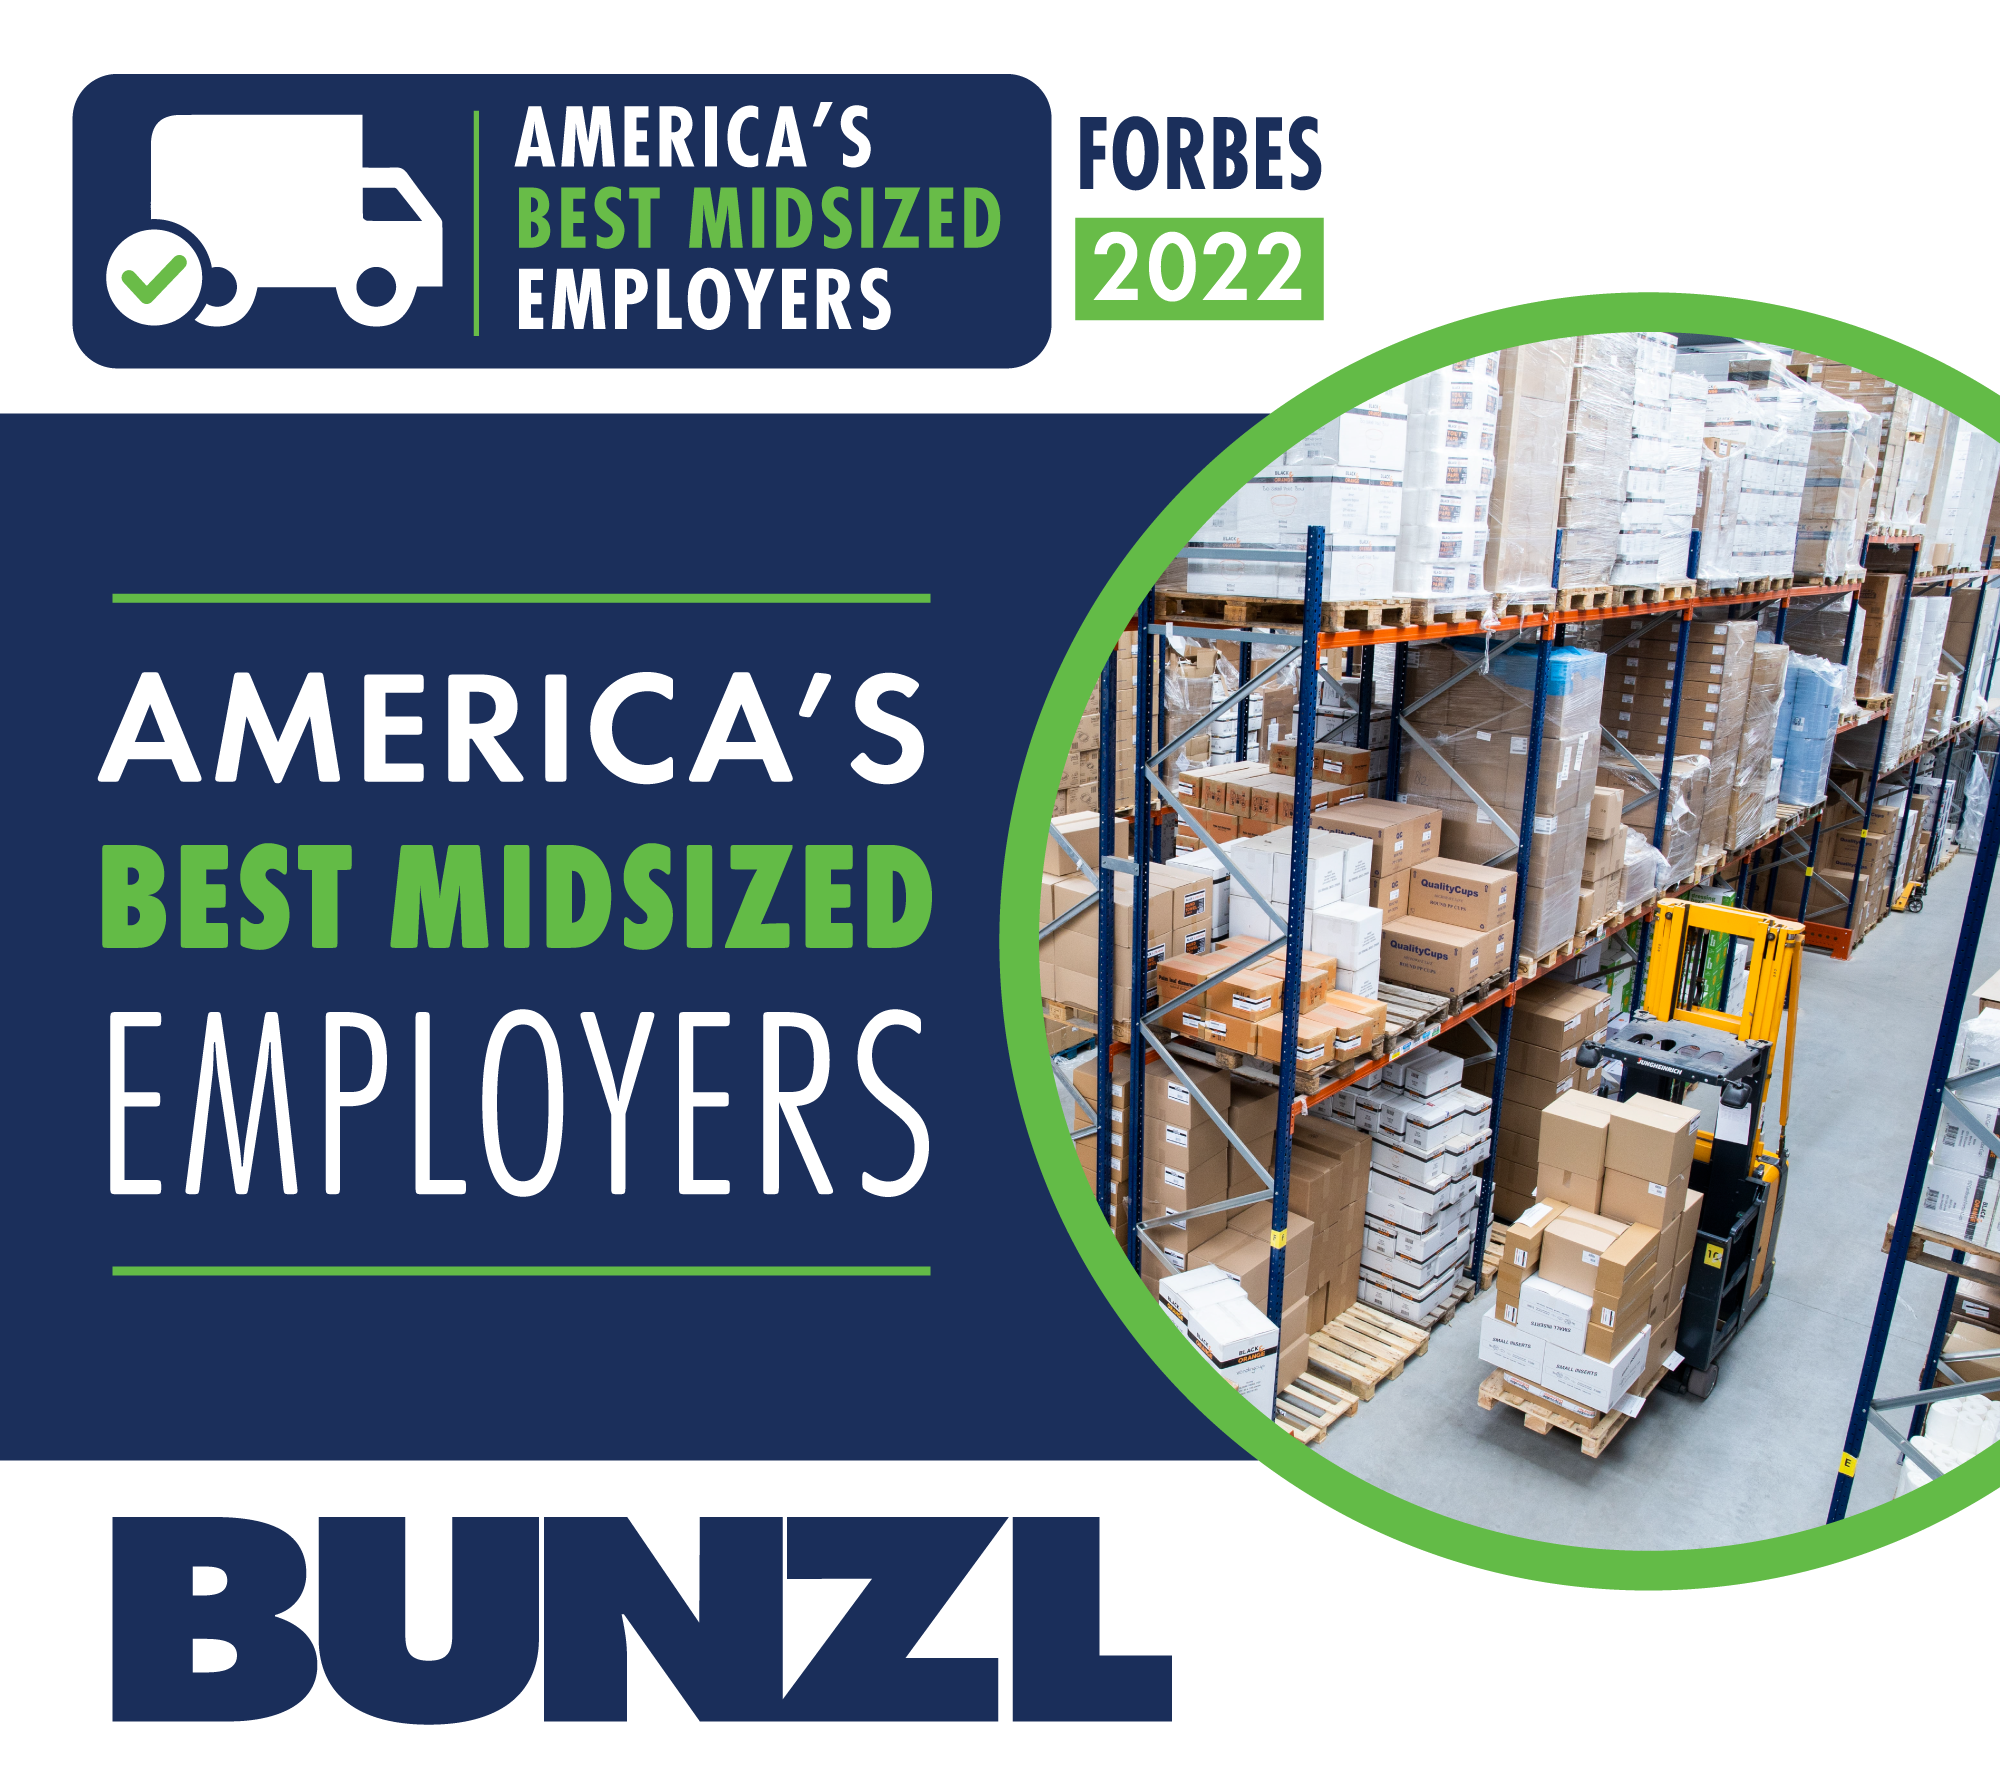  /></p>
<p>Bunzl is an essential business and we are busier than ever. We are immediately hiring full-time team members for our Warehouse. The Warehouse Order Selector will perform a variety of functions that may include receiving and processing incoming stock, picking and filling orders from stock, packing and shipping orders, or managing, organizing and retrieving stock in the warehouse.</p>
<p>Click below to for an inside look of what it is like to be on the Bunzl team!</p>
<p><a href=